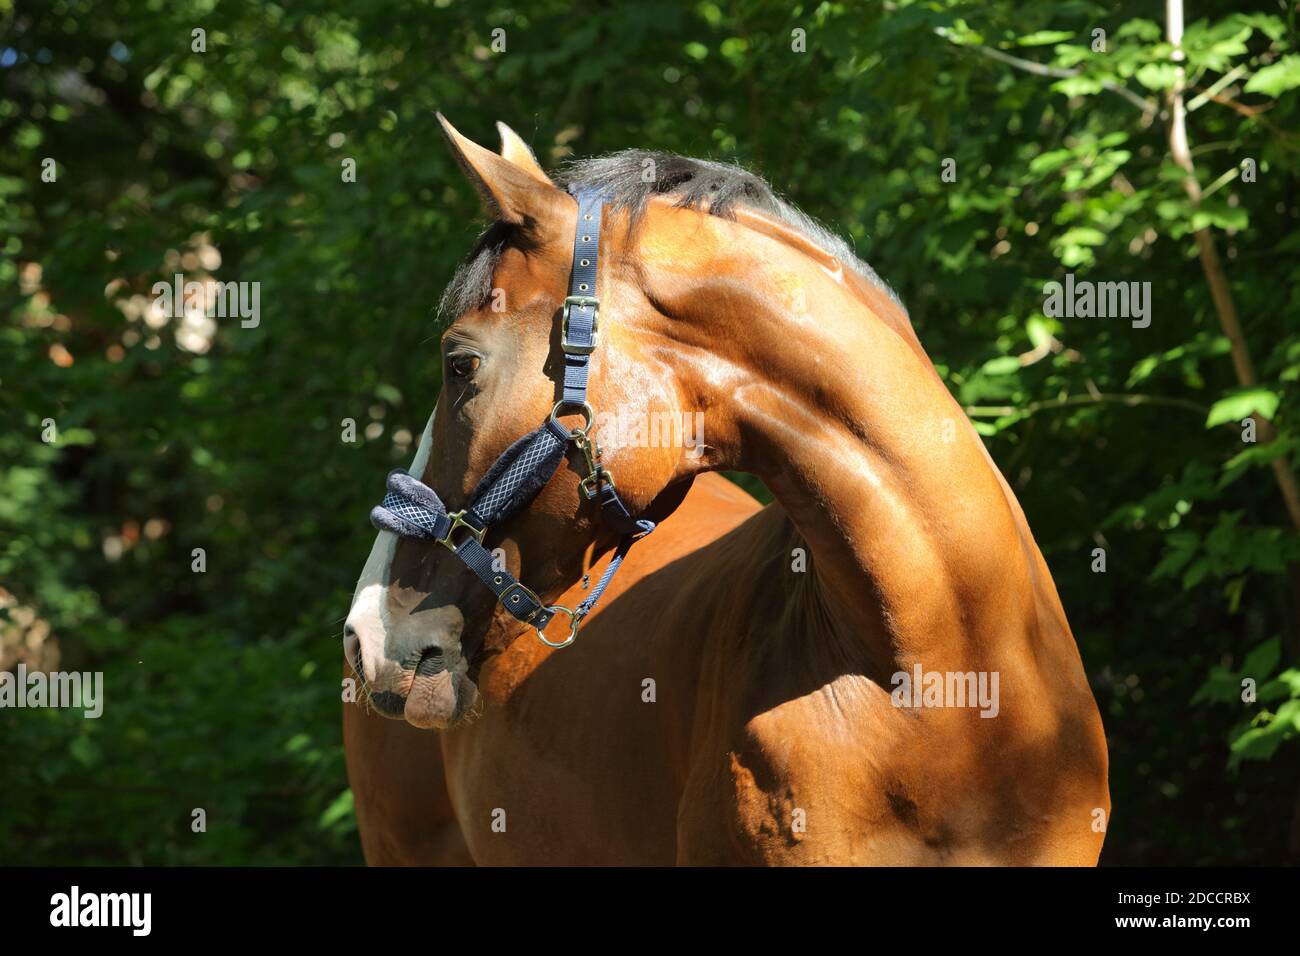 Thoroughbred race horse in nature background Stock Photo